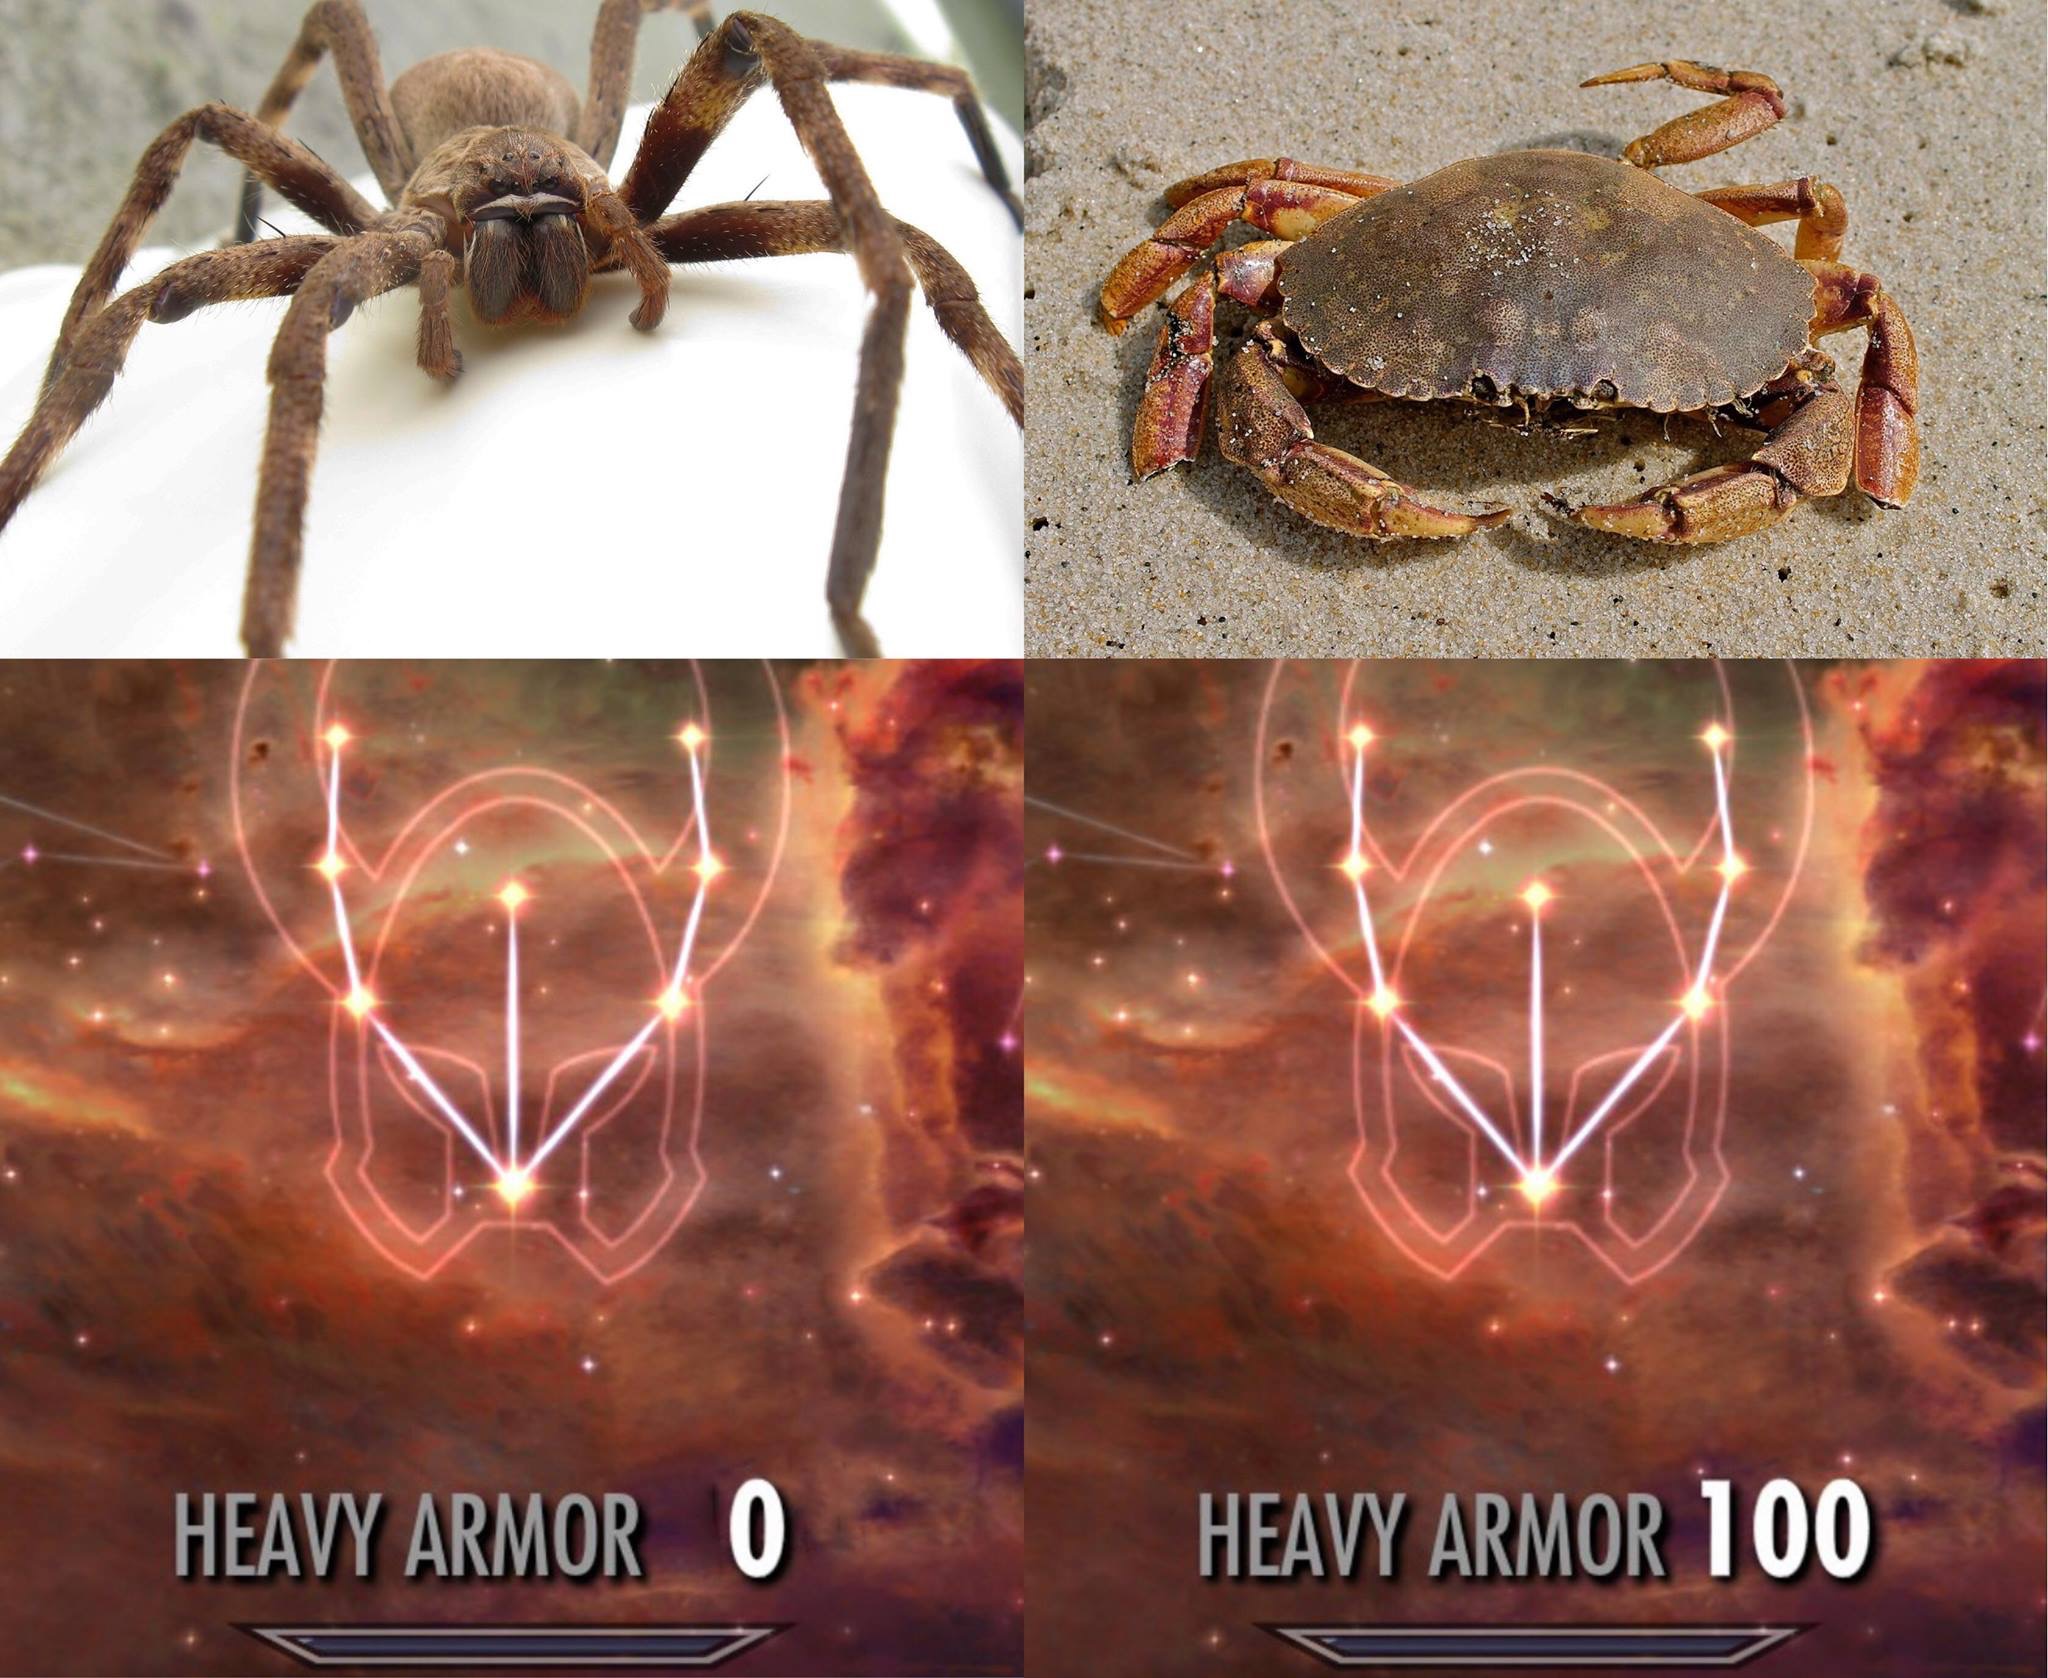 Crabs with varying armour